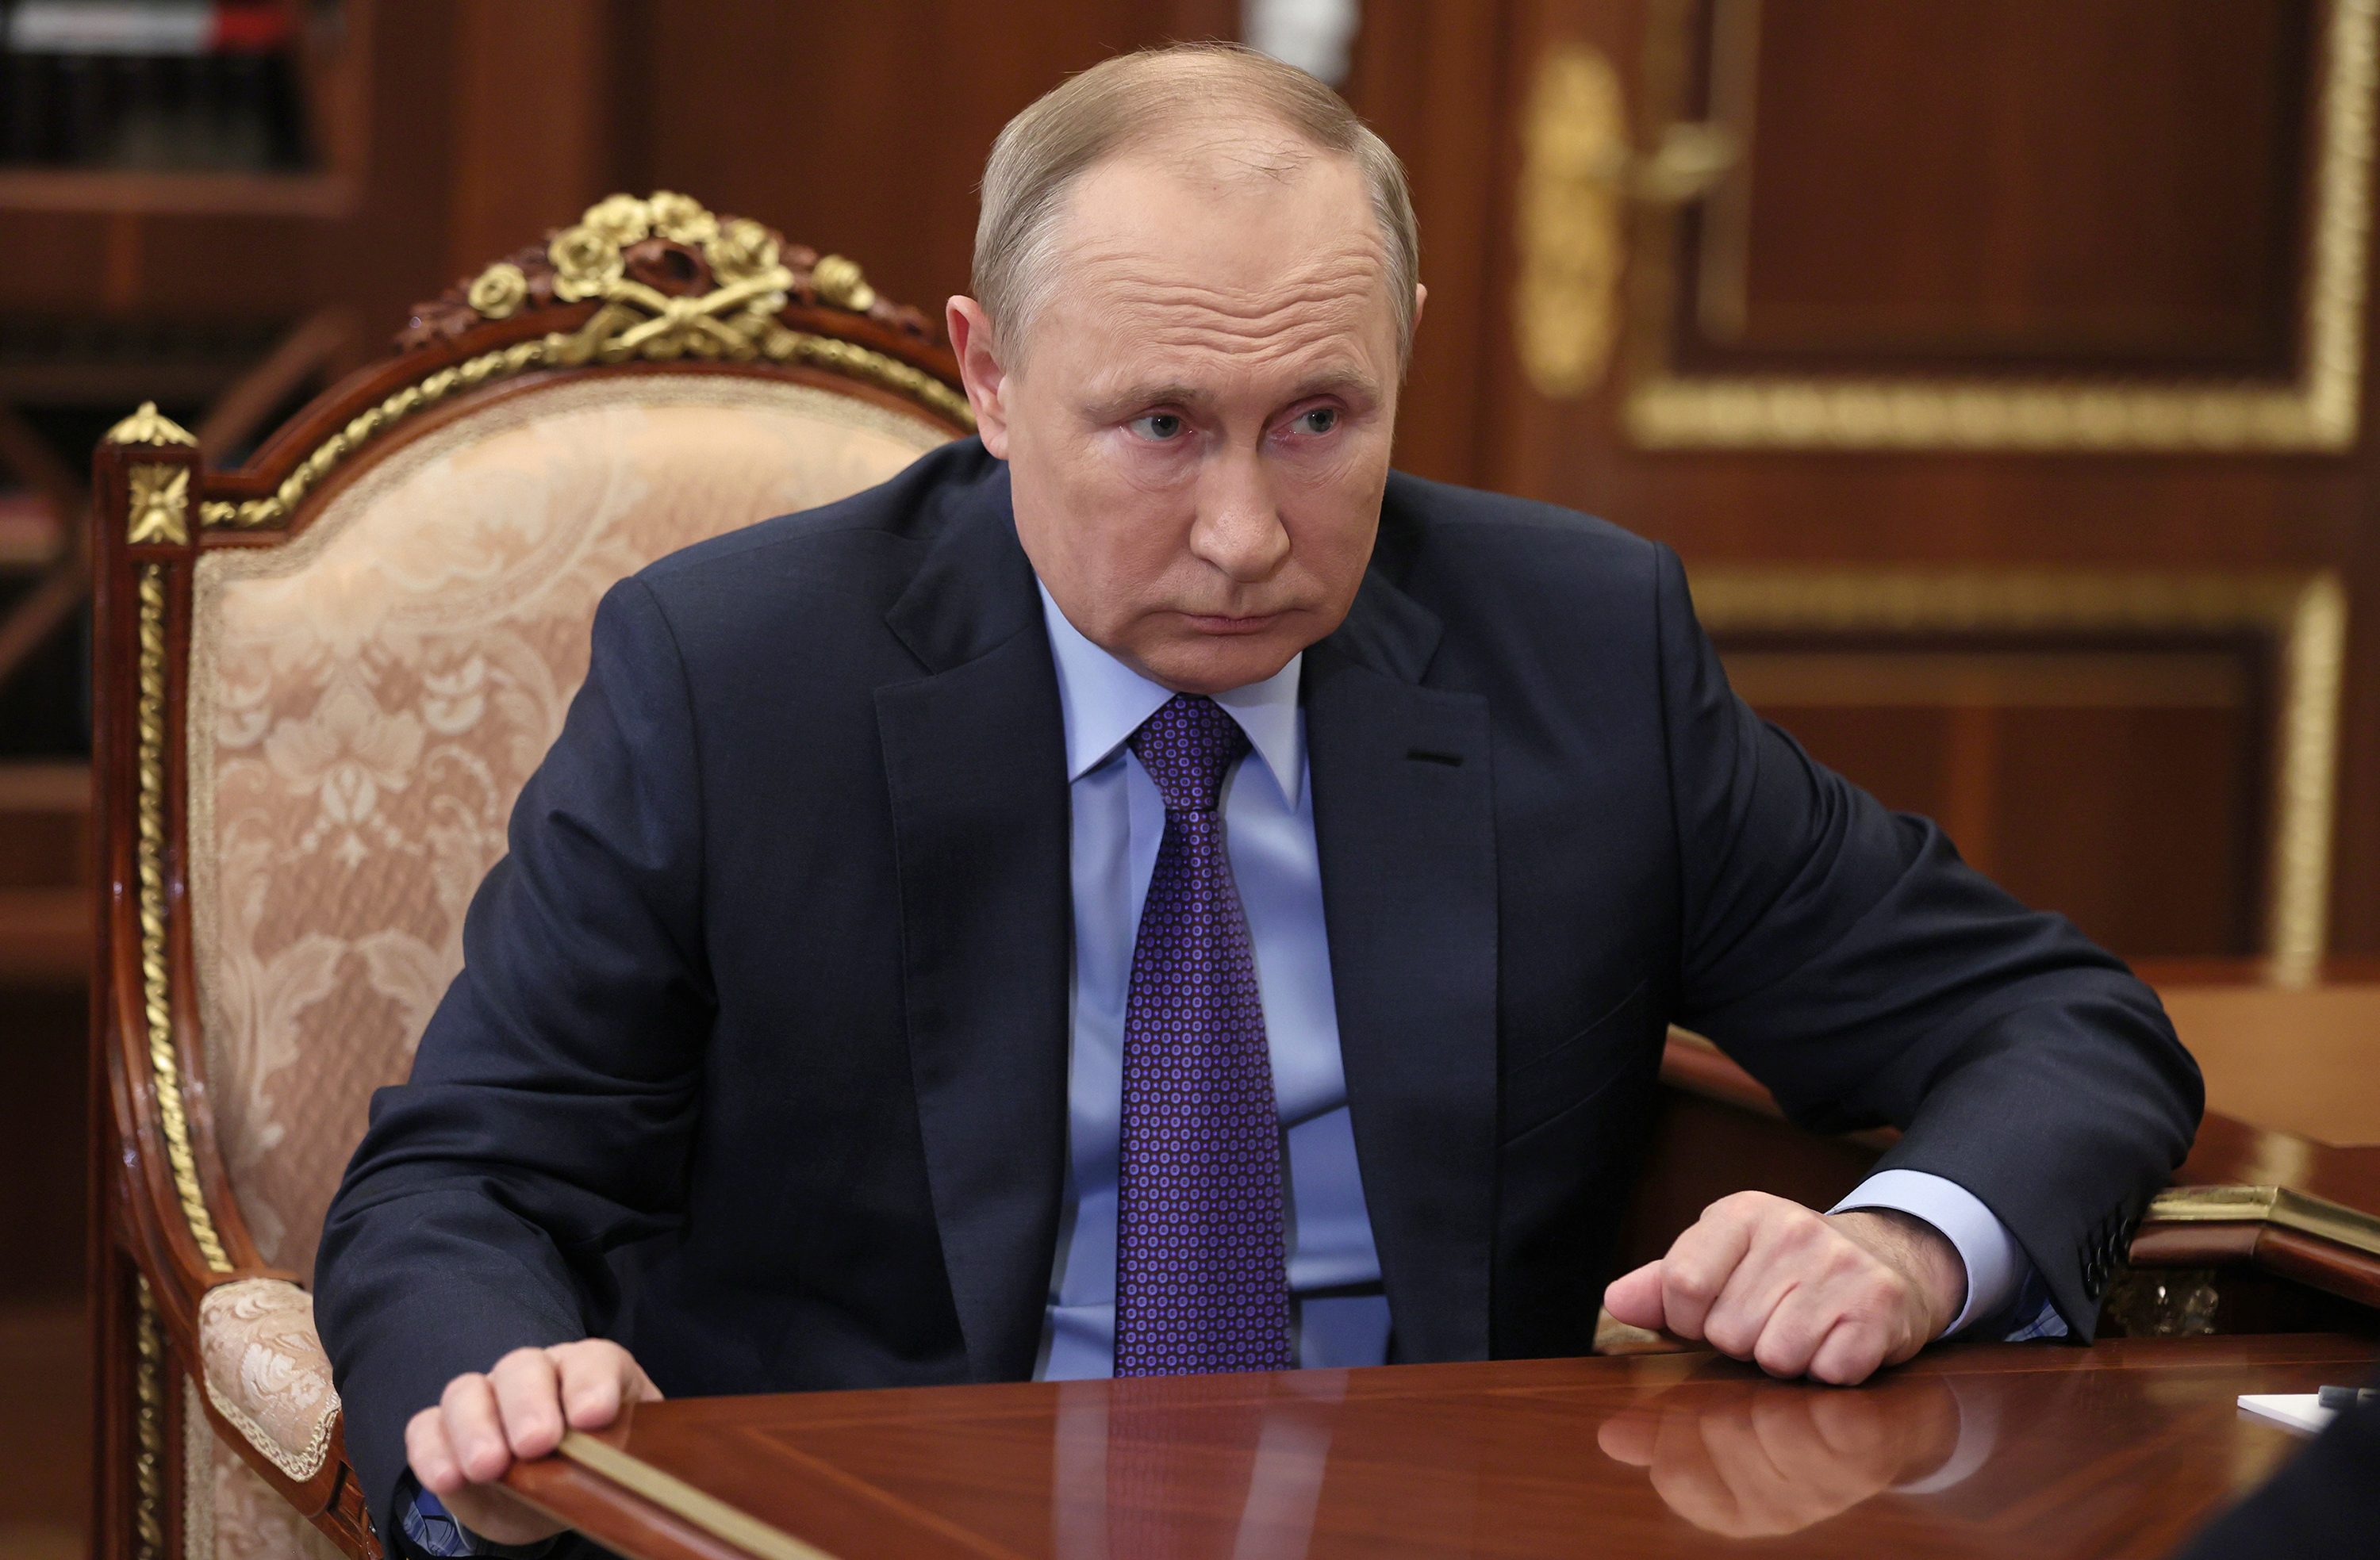 Putin: Russia needs ‘immediate’ guarantees, doesn’t want conflict